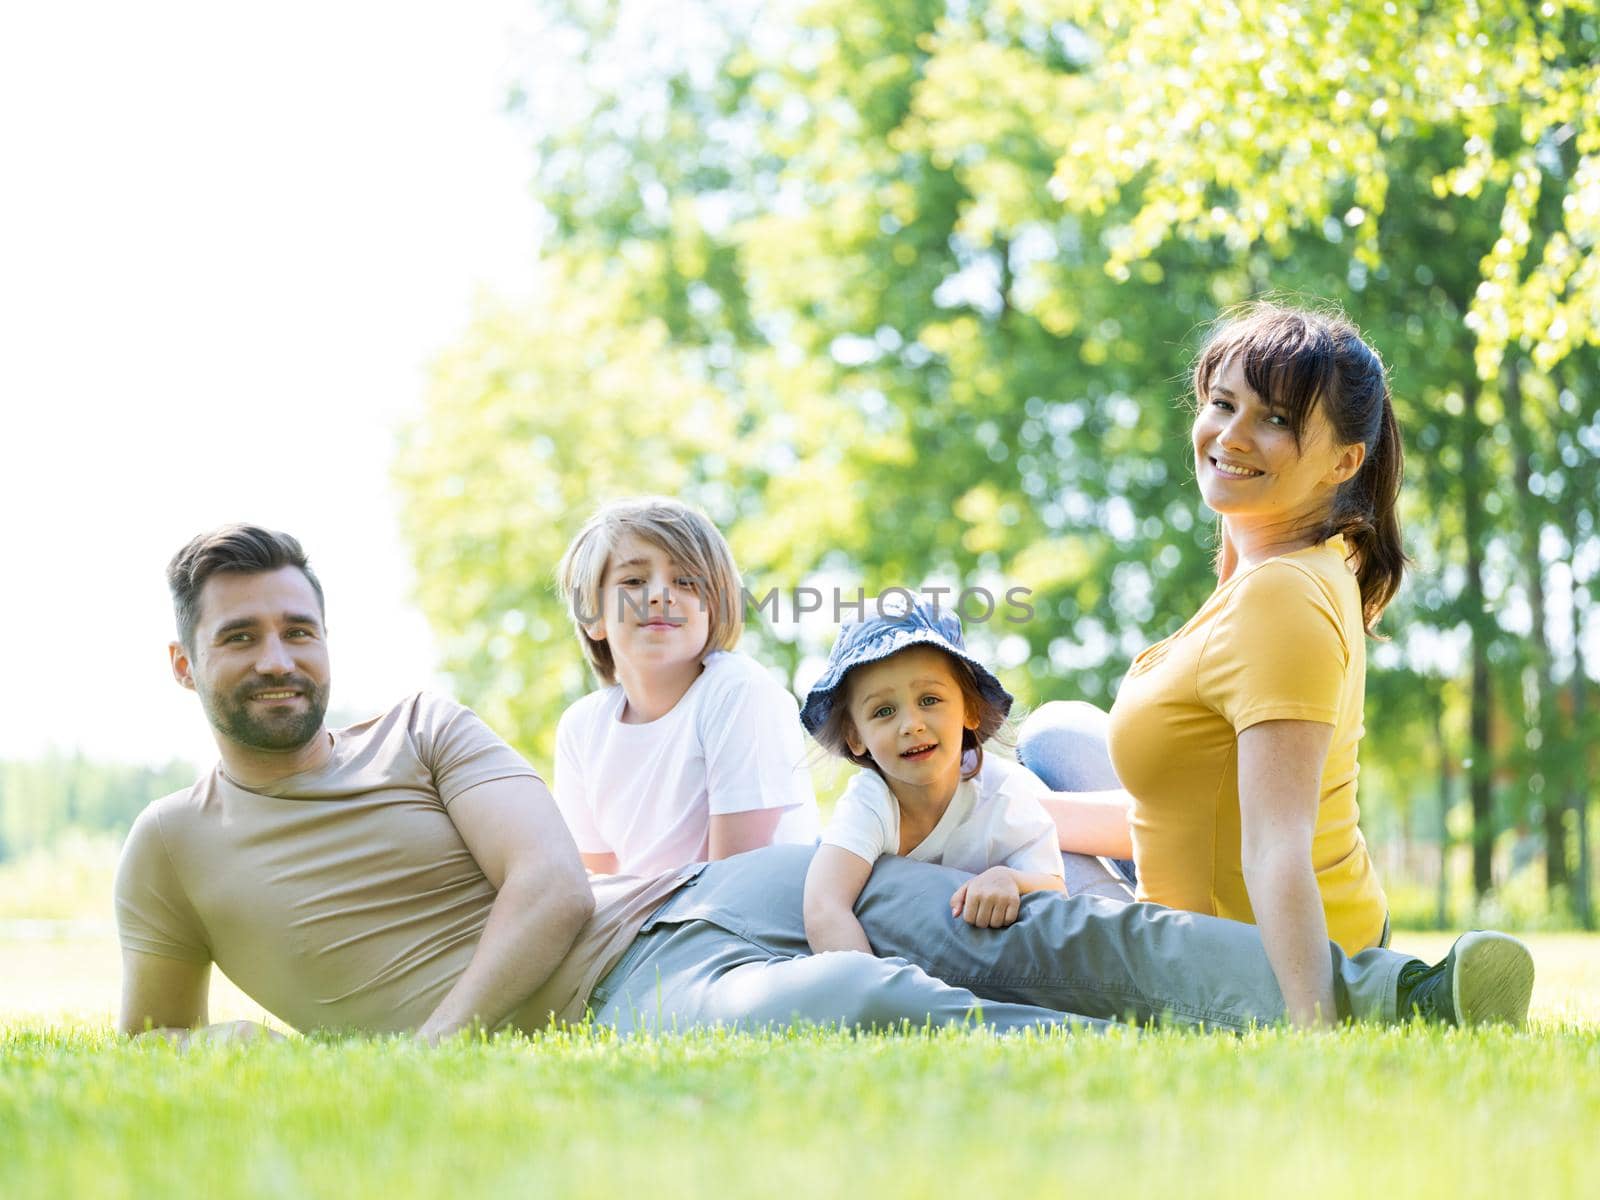 Portrait of happy family of parents and two children sitting in park outdoors and smiling